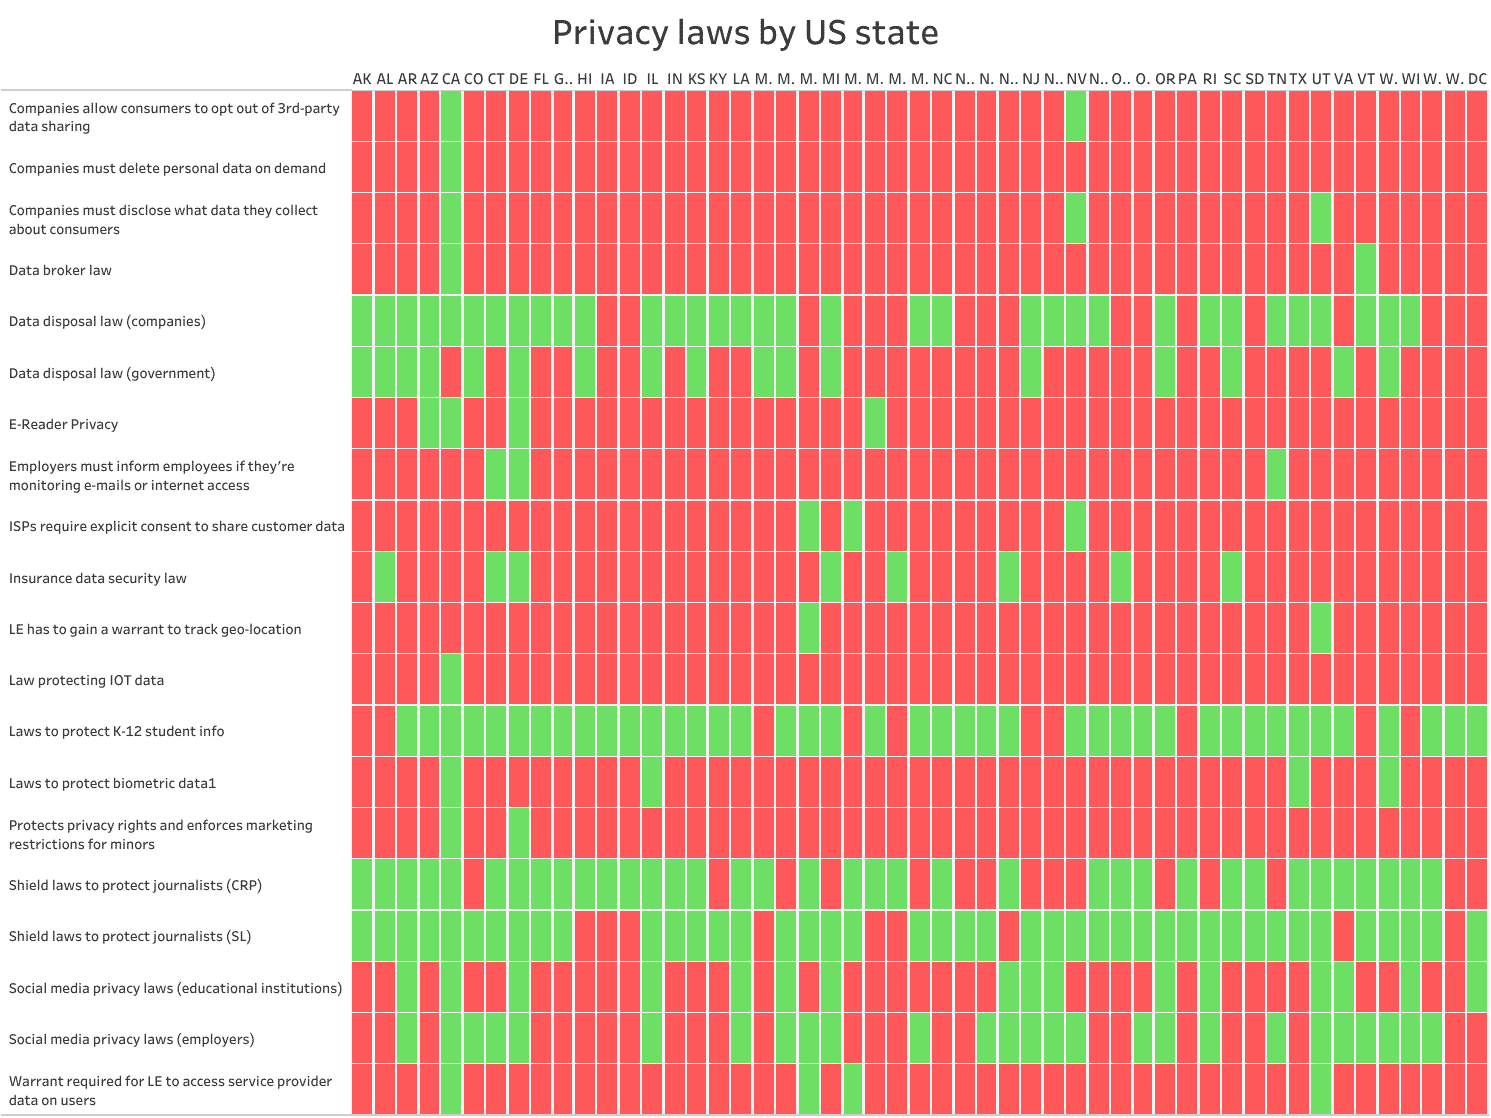 graph comparing privacy laws by US state